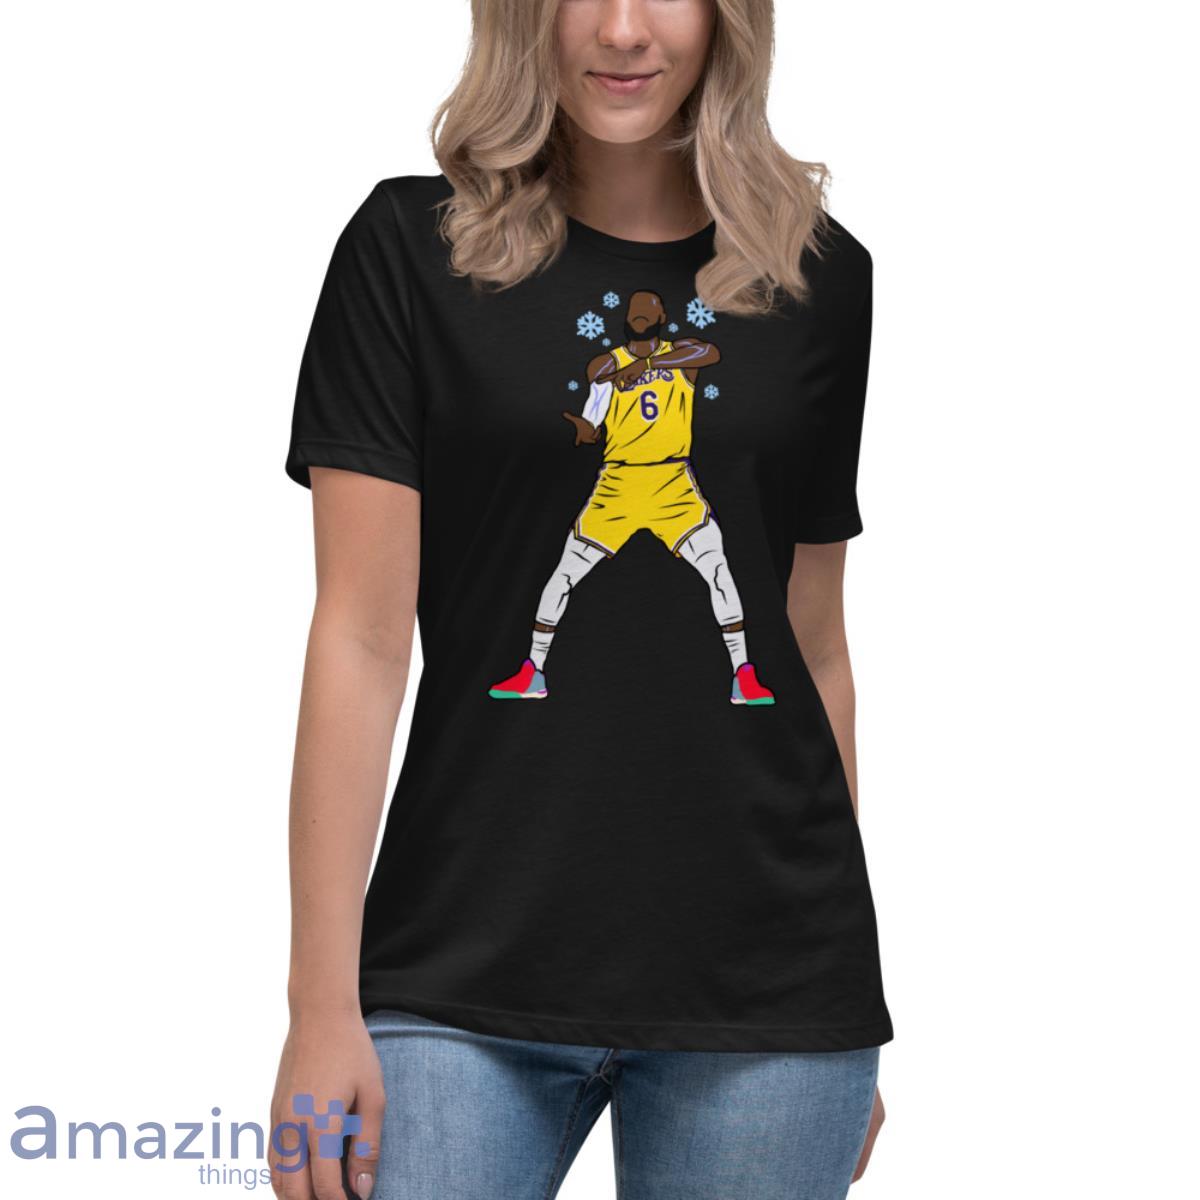 LeBron James Ice In My Veins T-Shirt